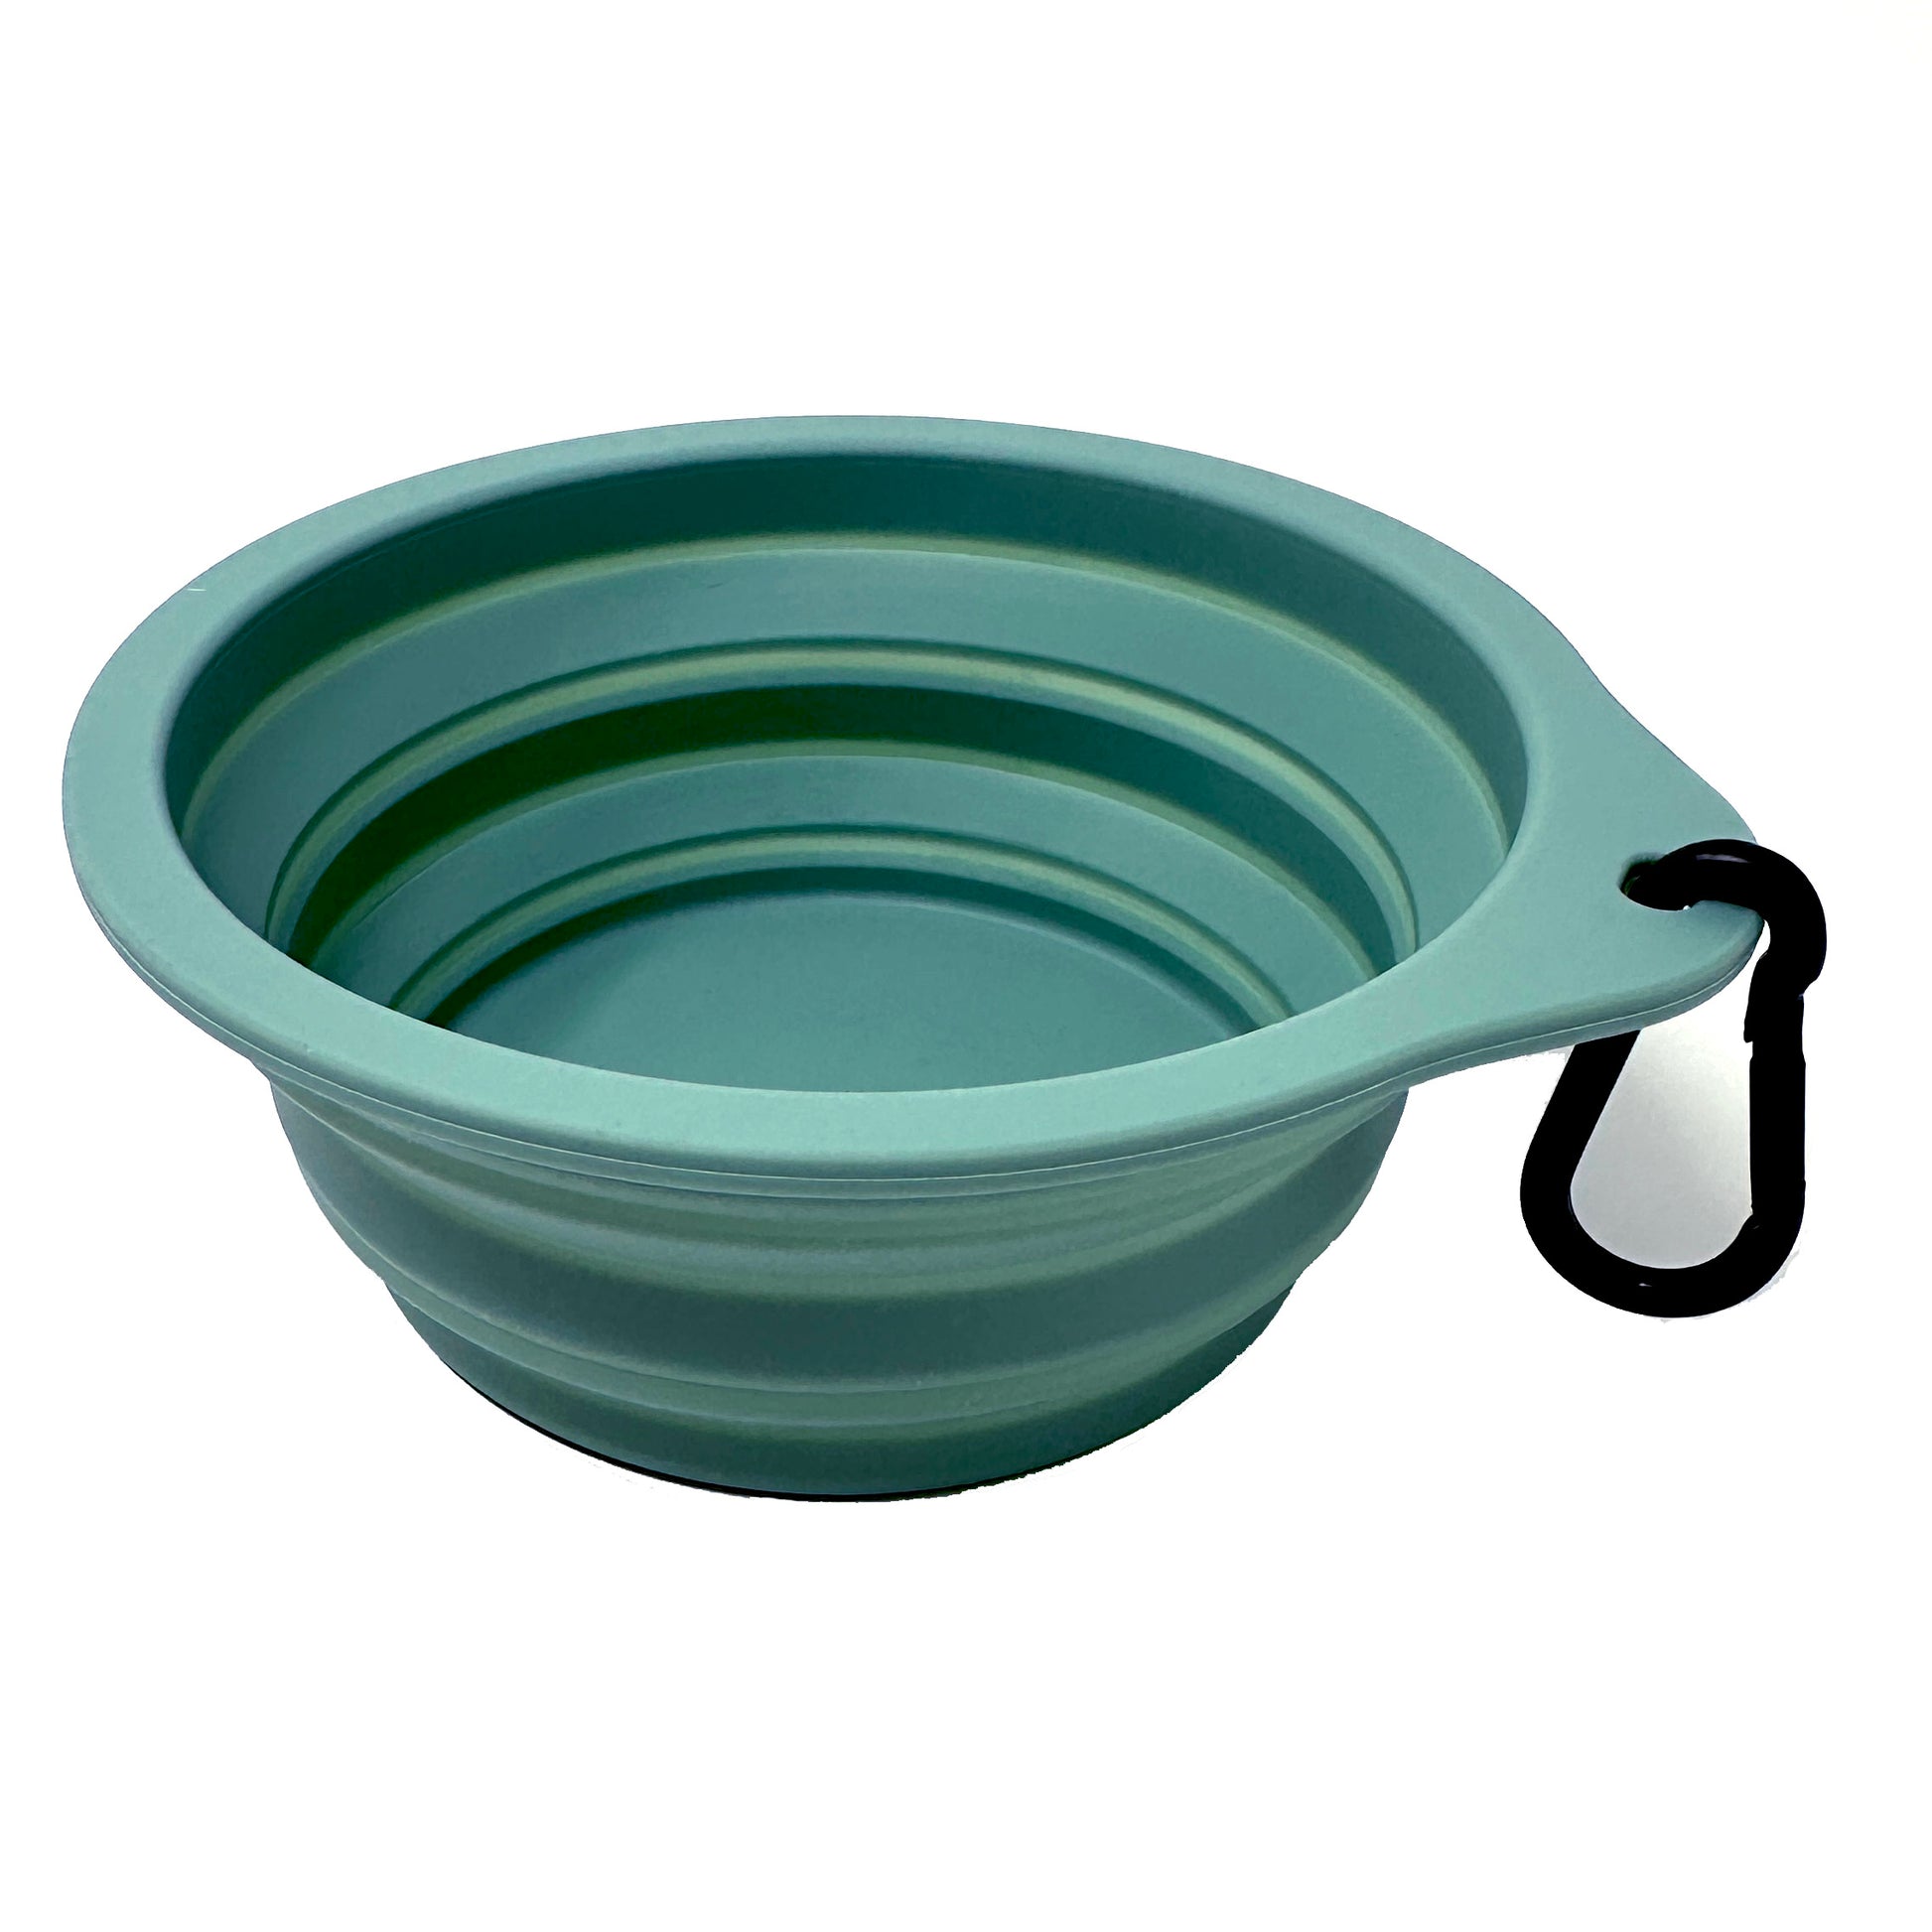 Collapsible Adventure Bowl – Litto Howler